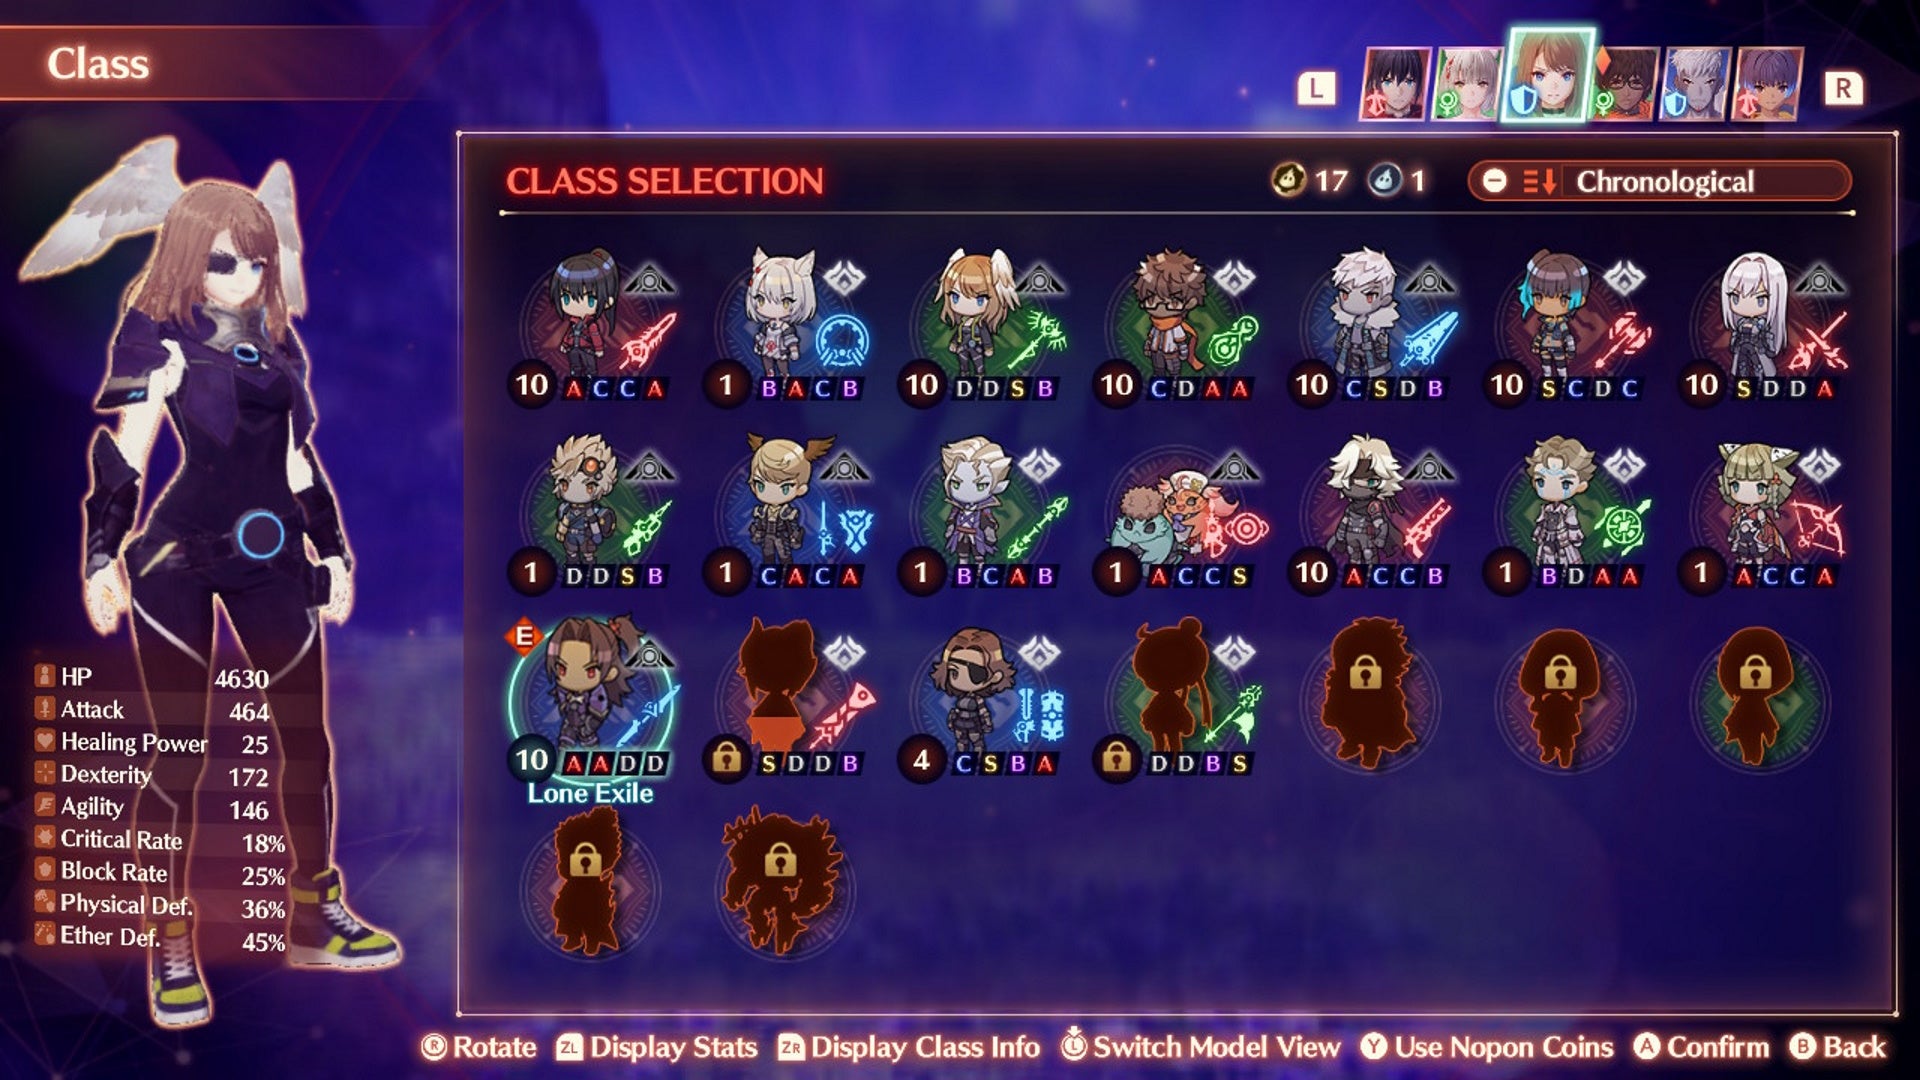 Xenoblade Chronicles 3 arts: The Lone Exile class on the class selection screen